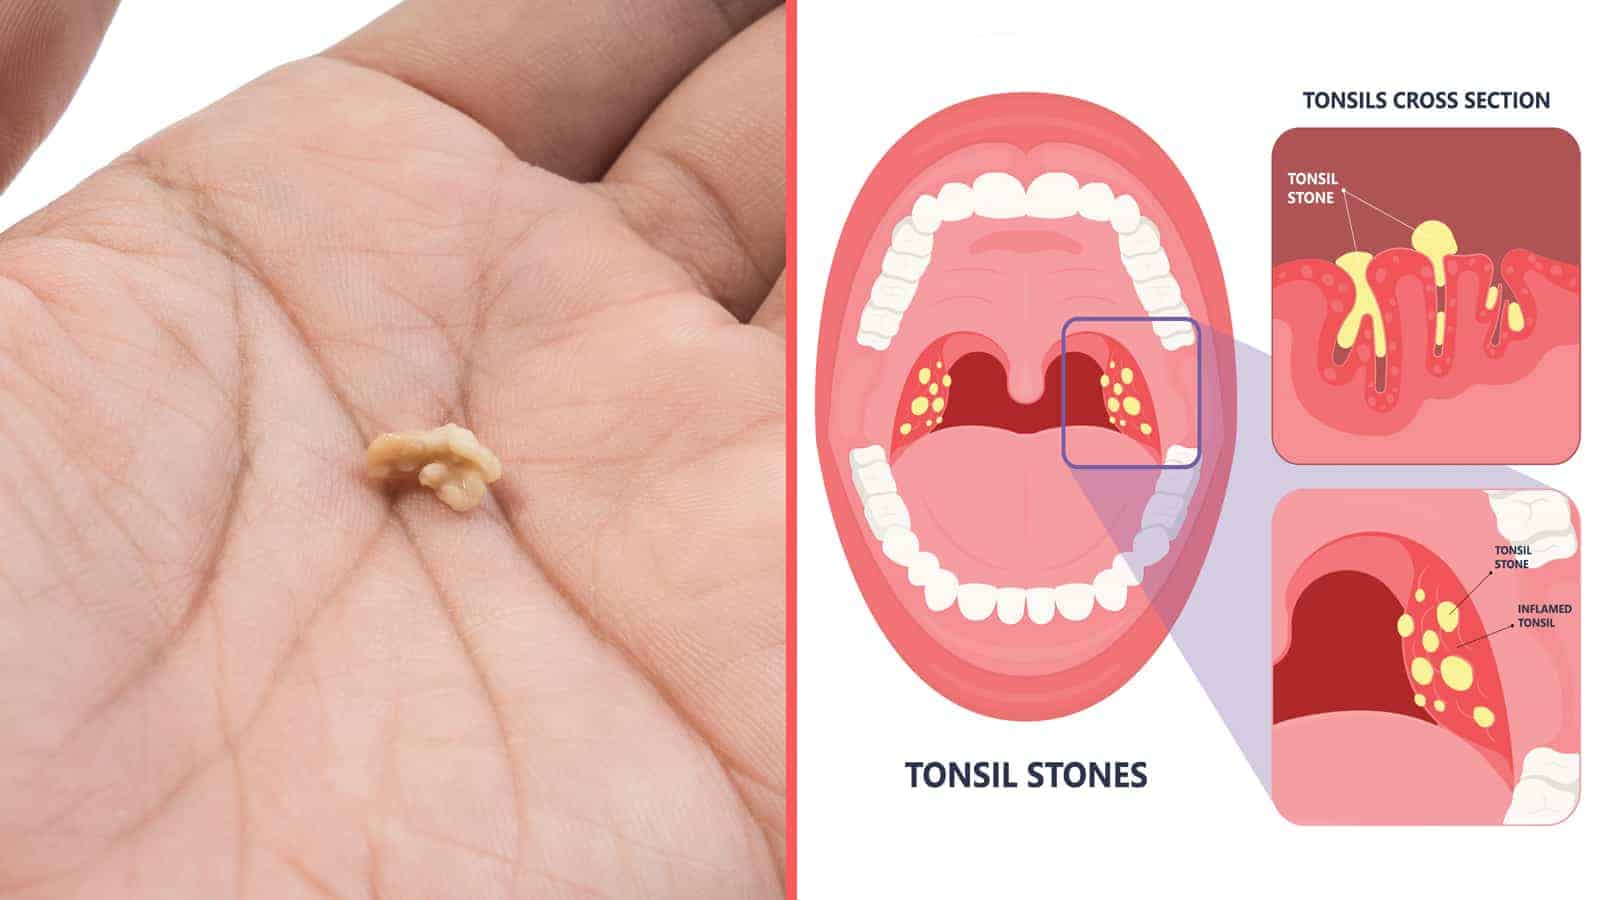 How to avoid tonsil stones